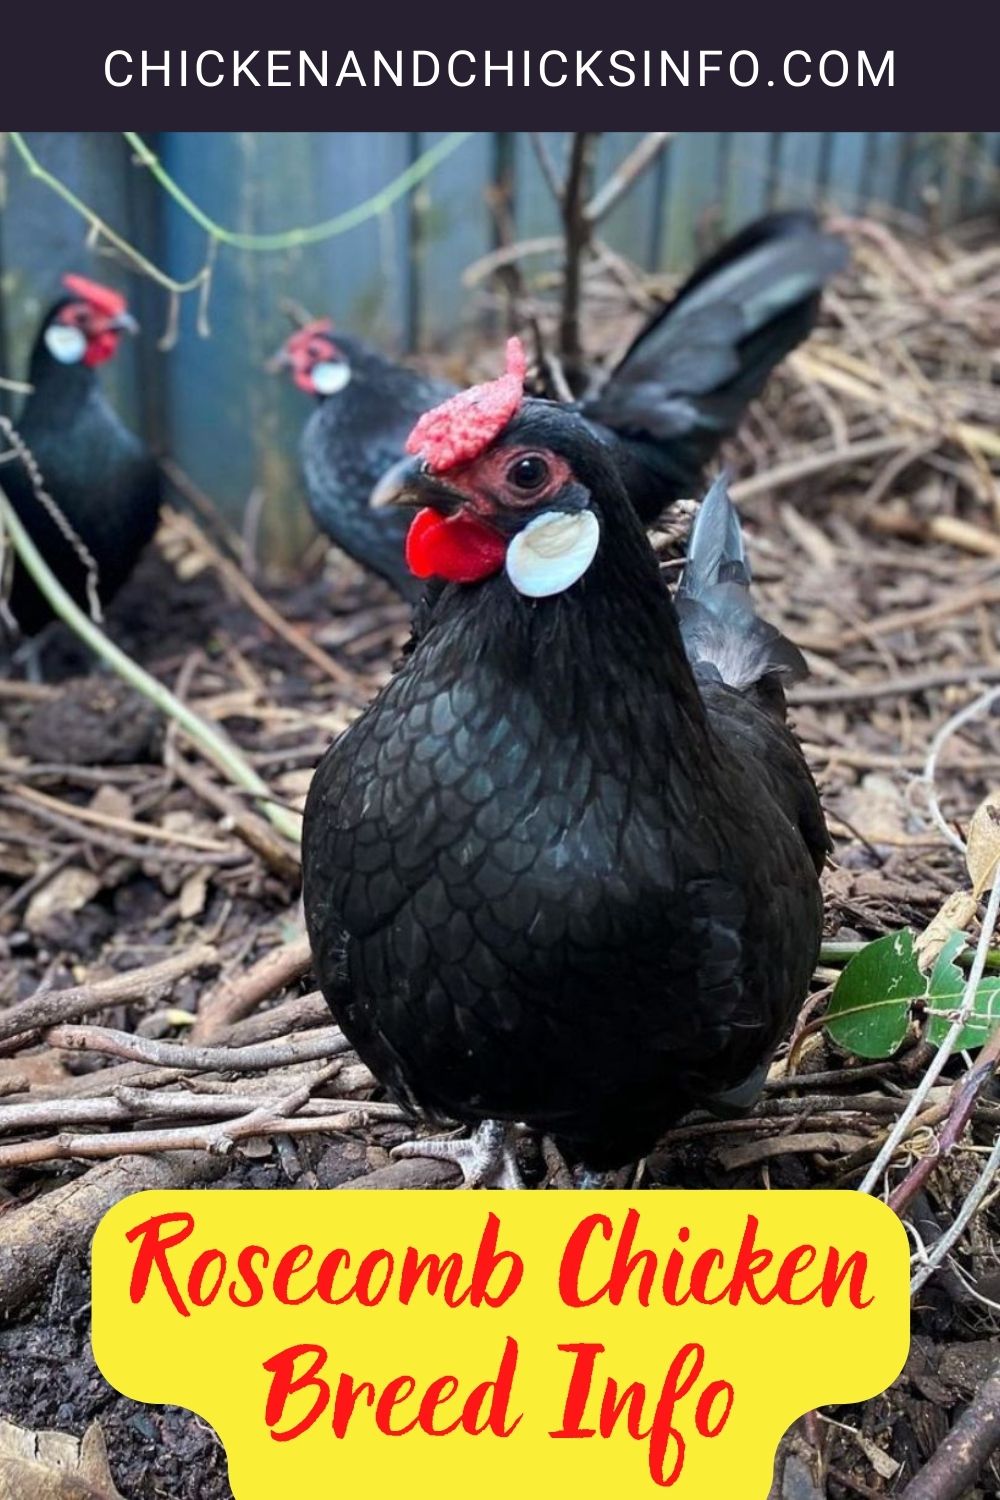 Rosecomb Chicken Breed Info + Where to Buy pinterest image.